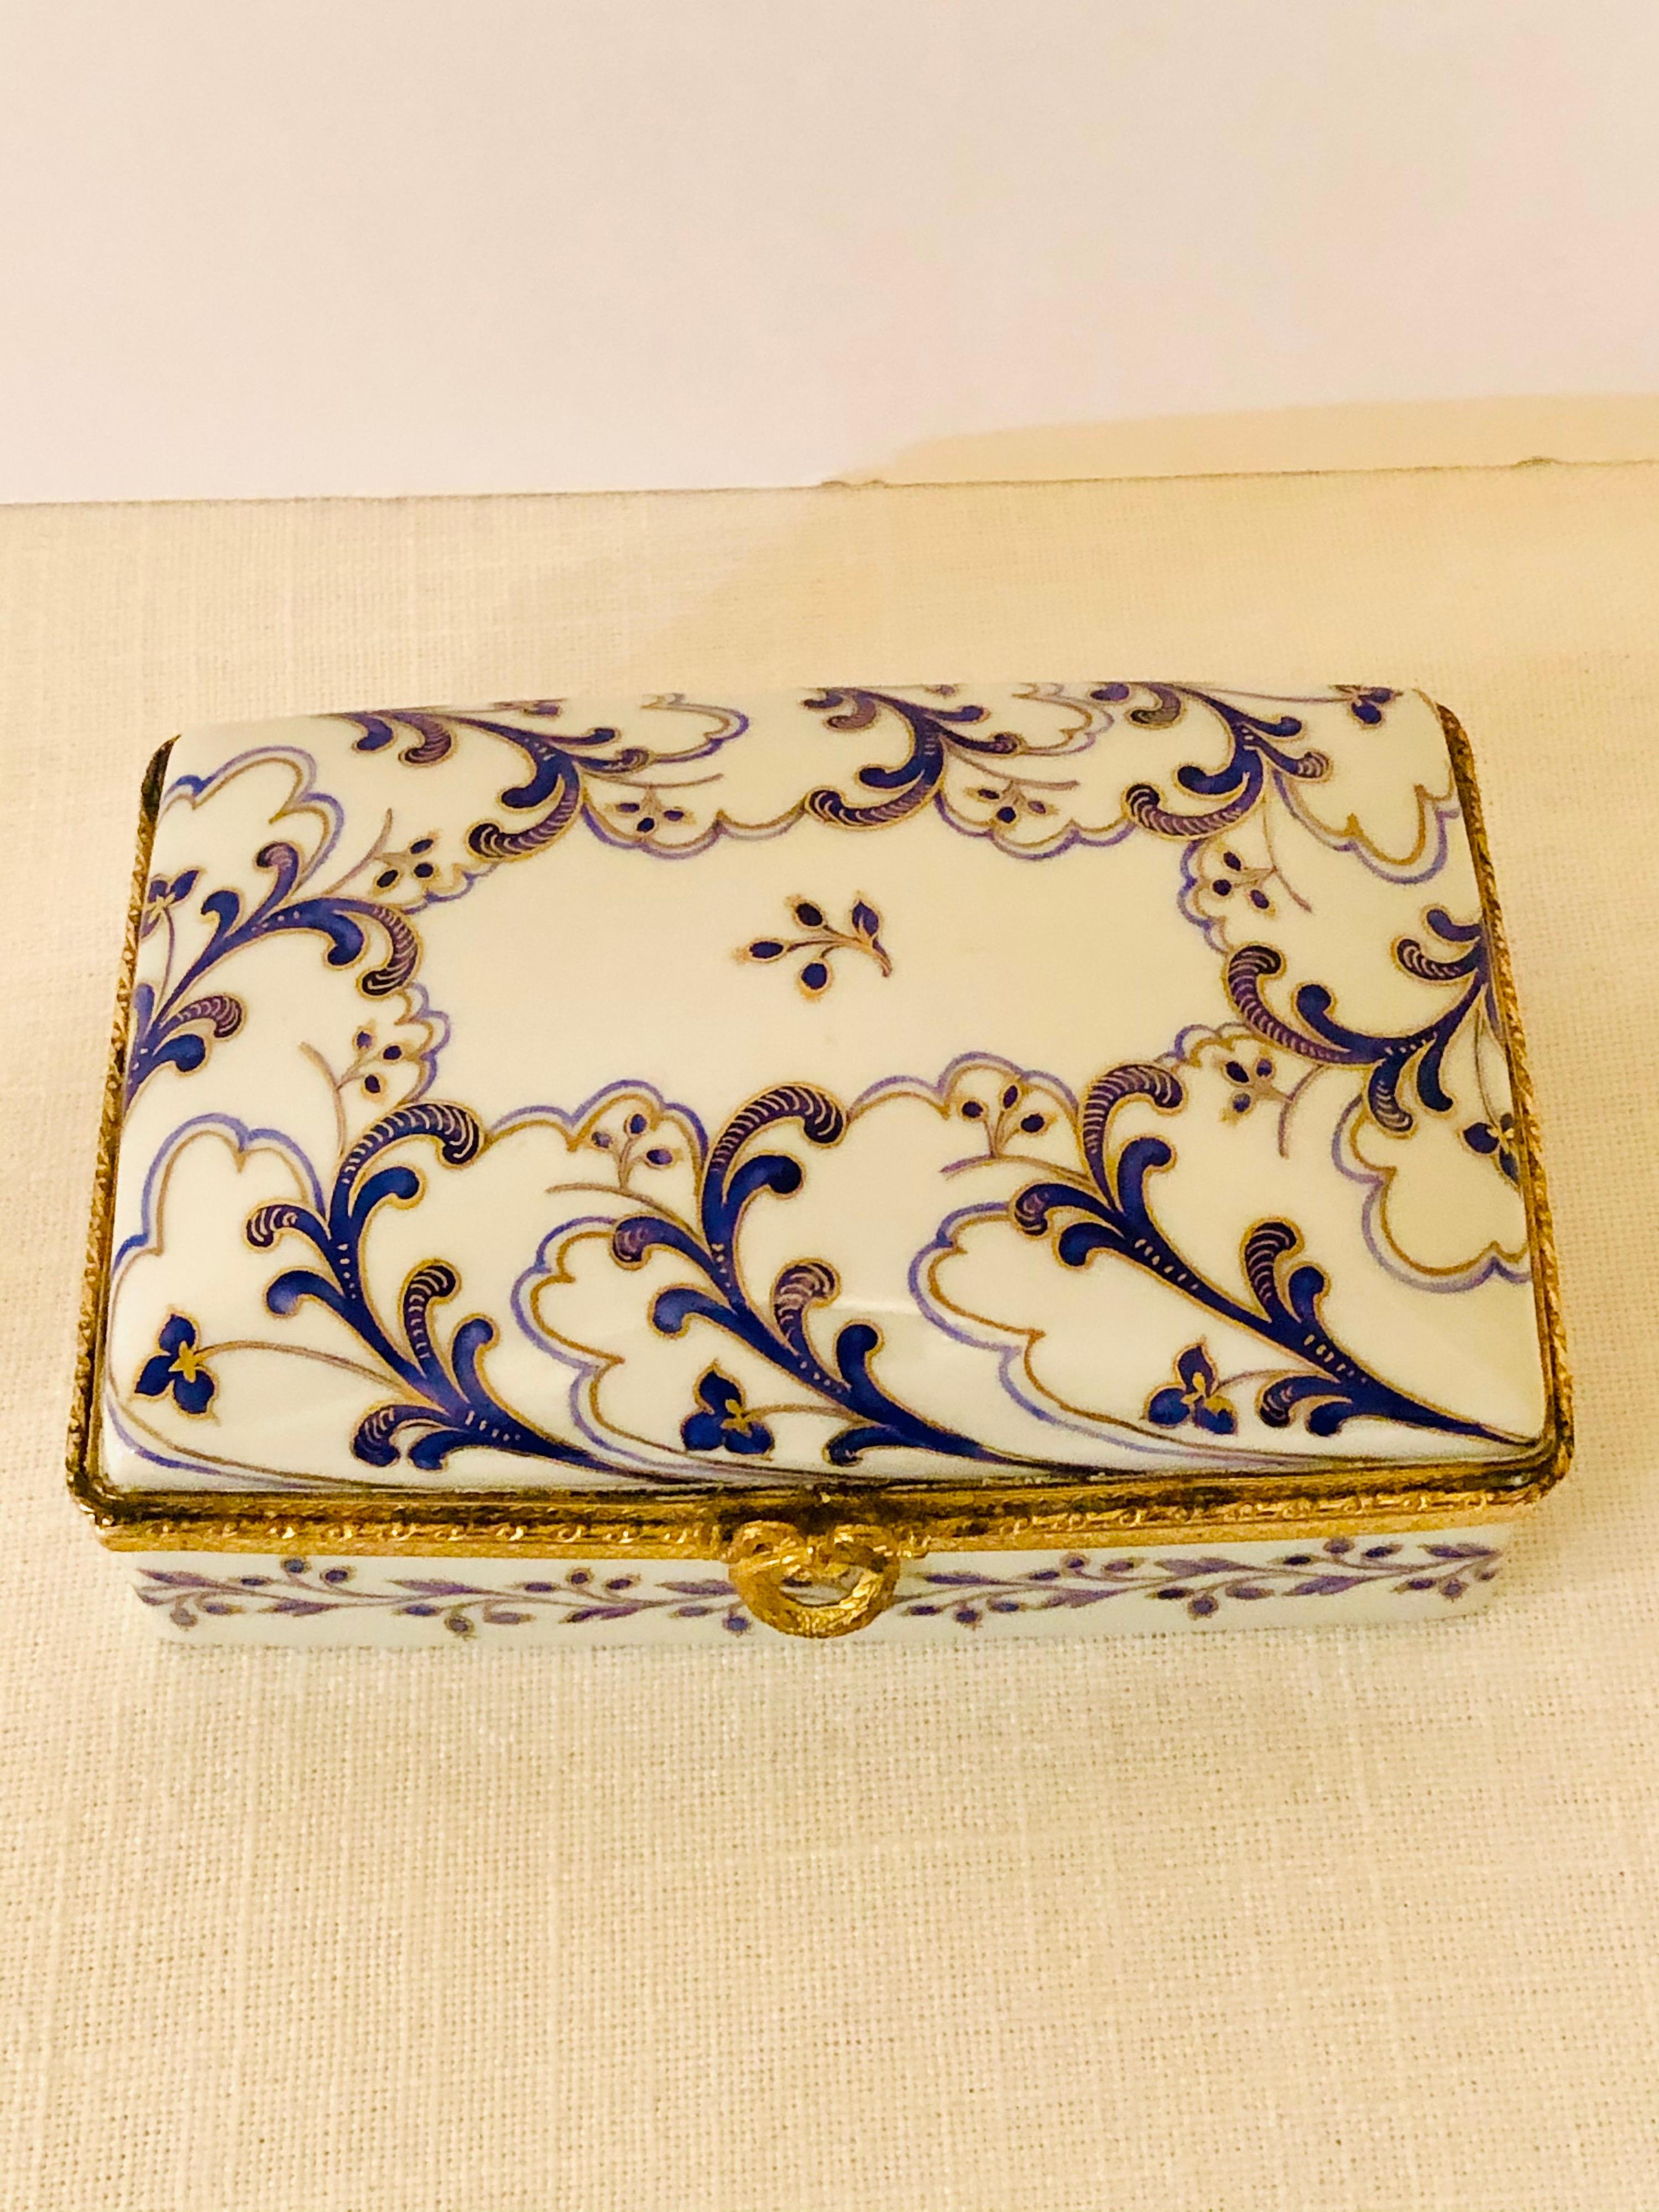 Le Tallec Porcelain Box with Hand-Painted Cobalt and Gold Arabesque Decoration 3